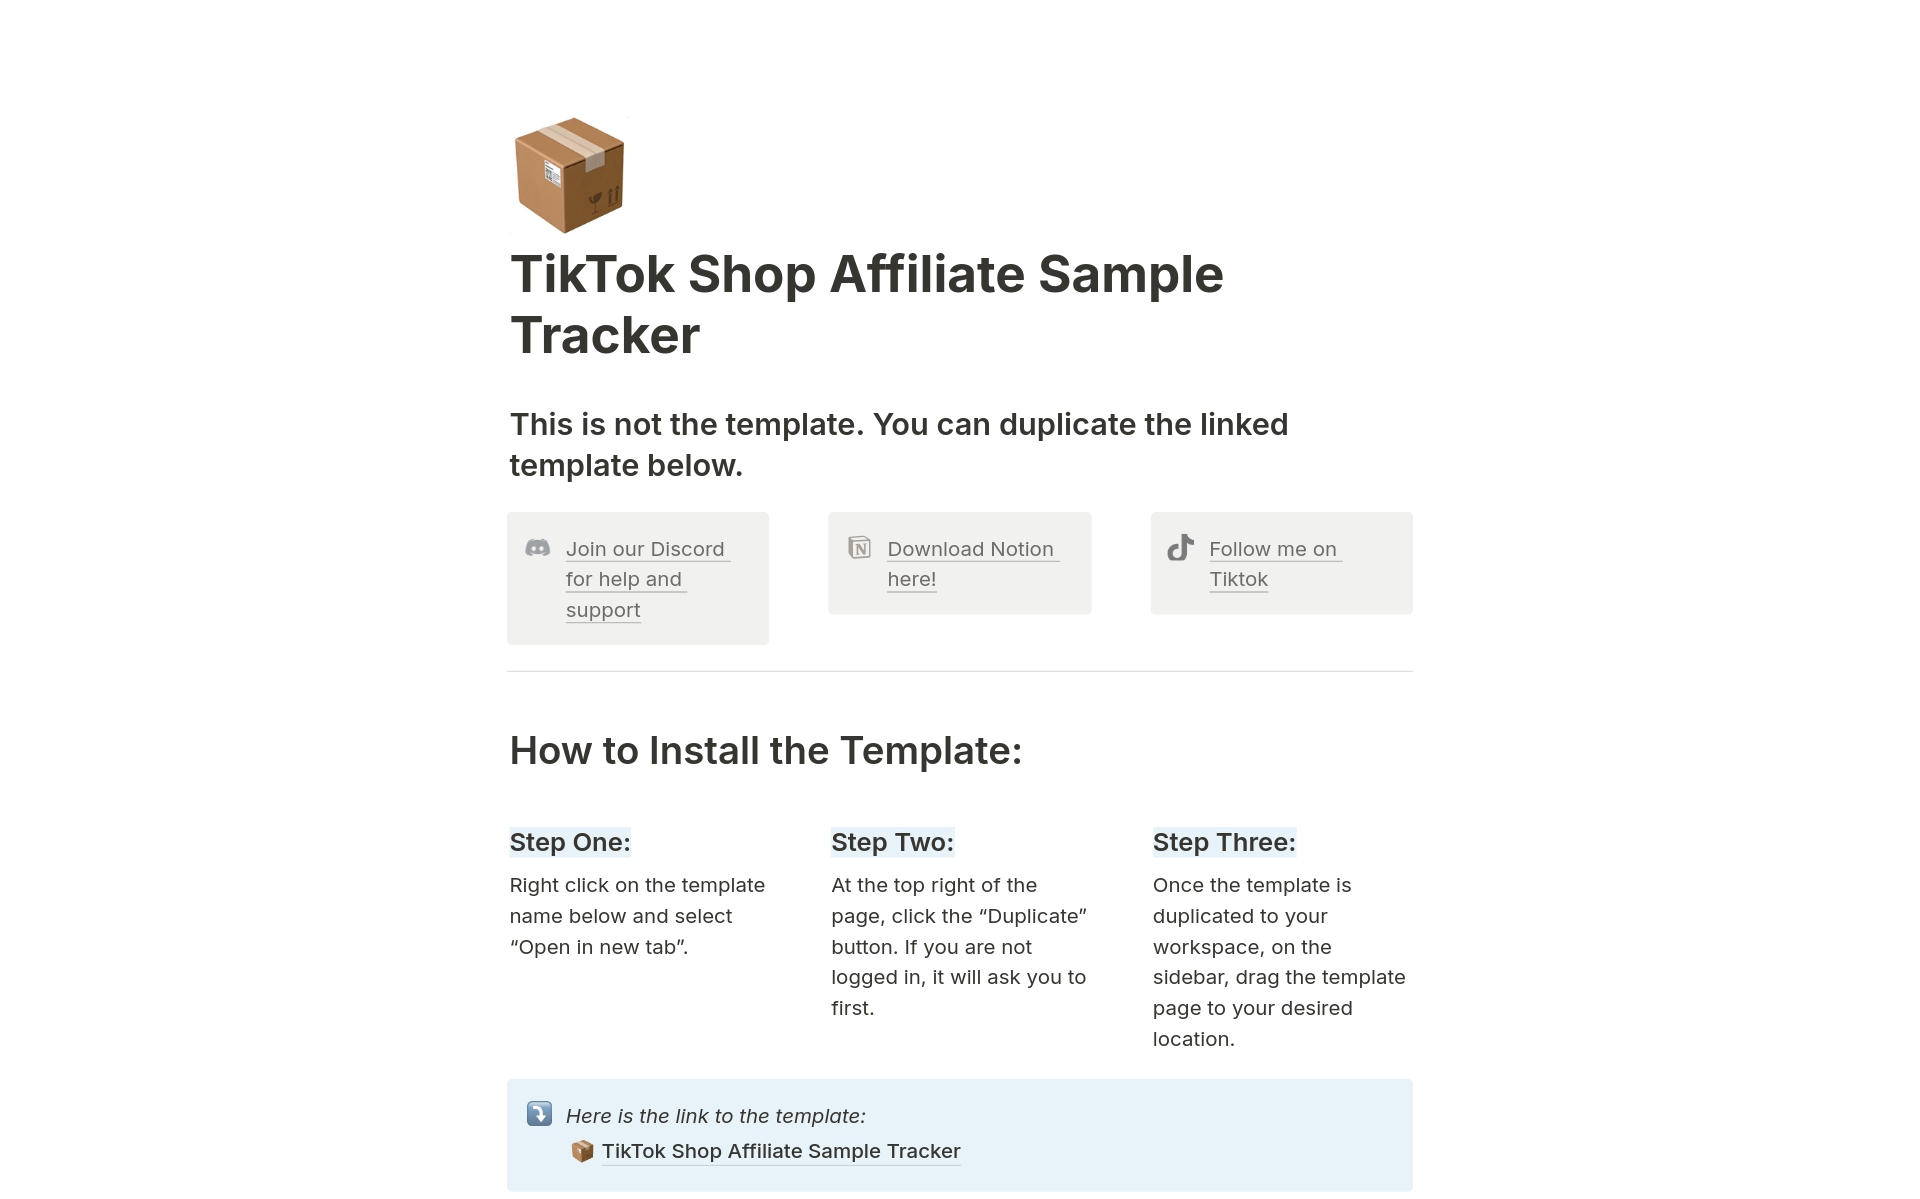 A single page Notion template to help you manage your TikTok Shop Samples and keep track of content required for the samples.